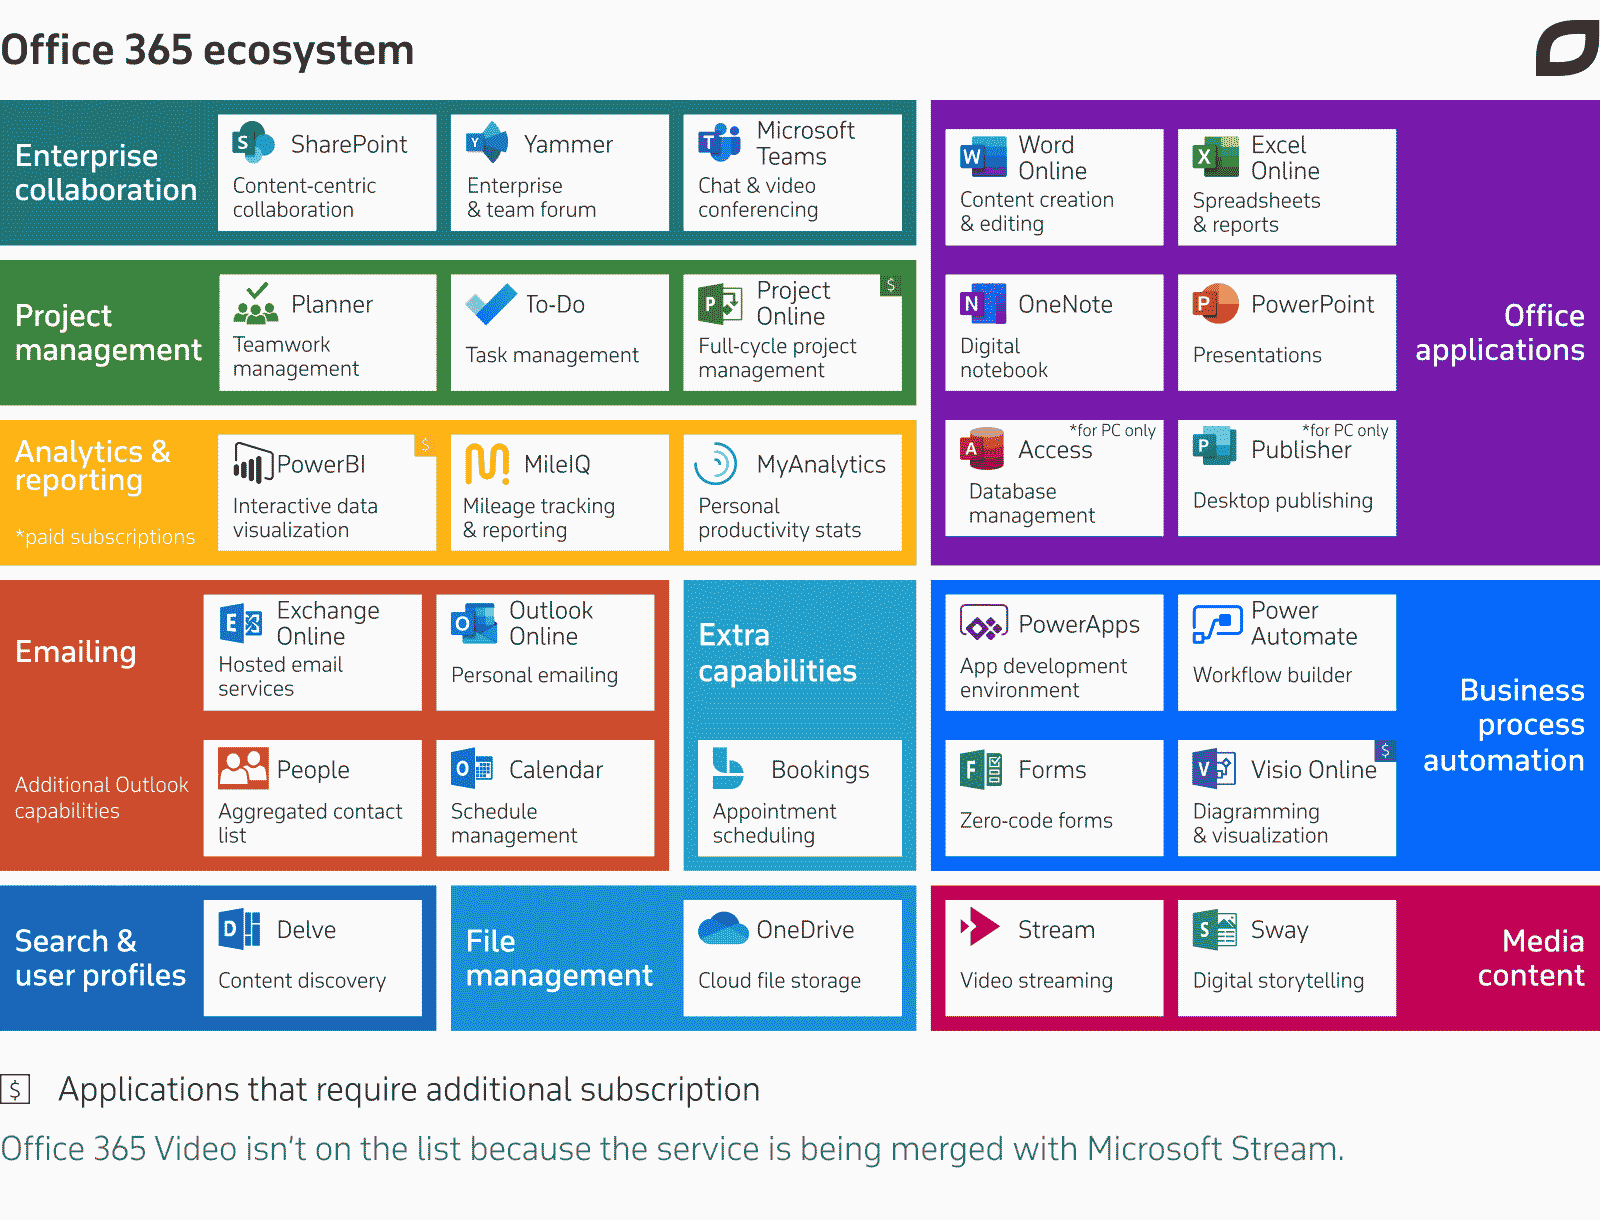 https://www.itransition.com/blog/office-365-sharepoint-collaboration